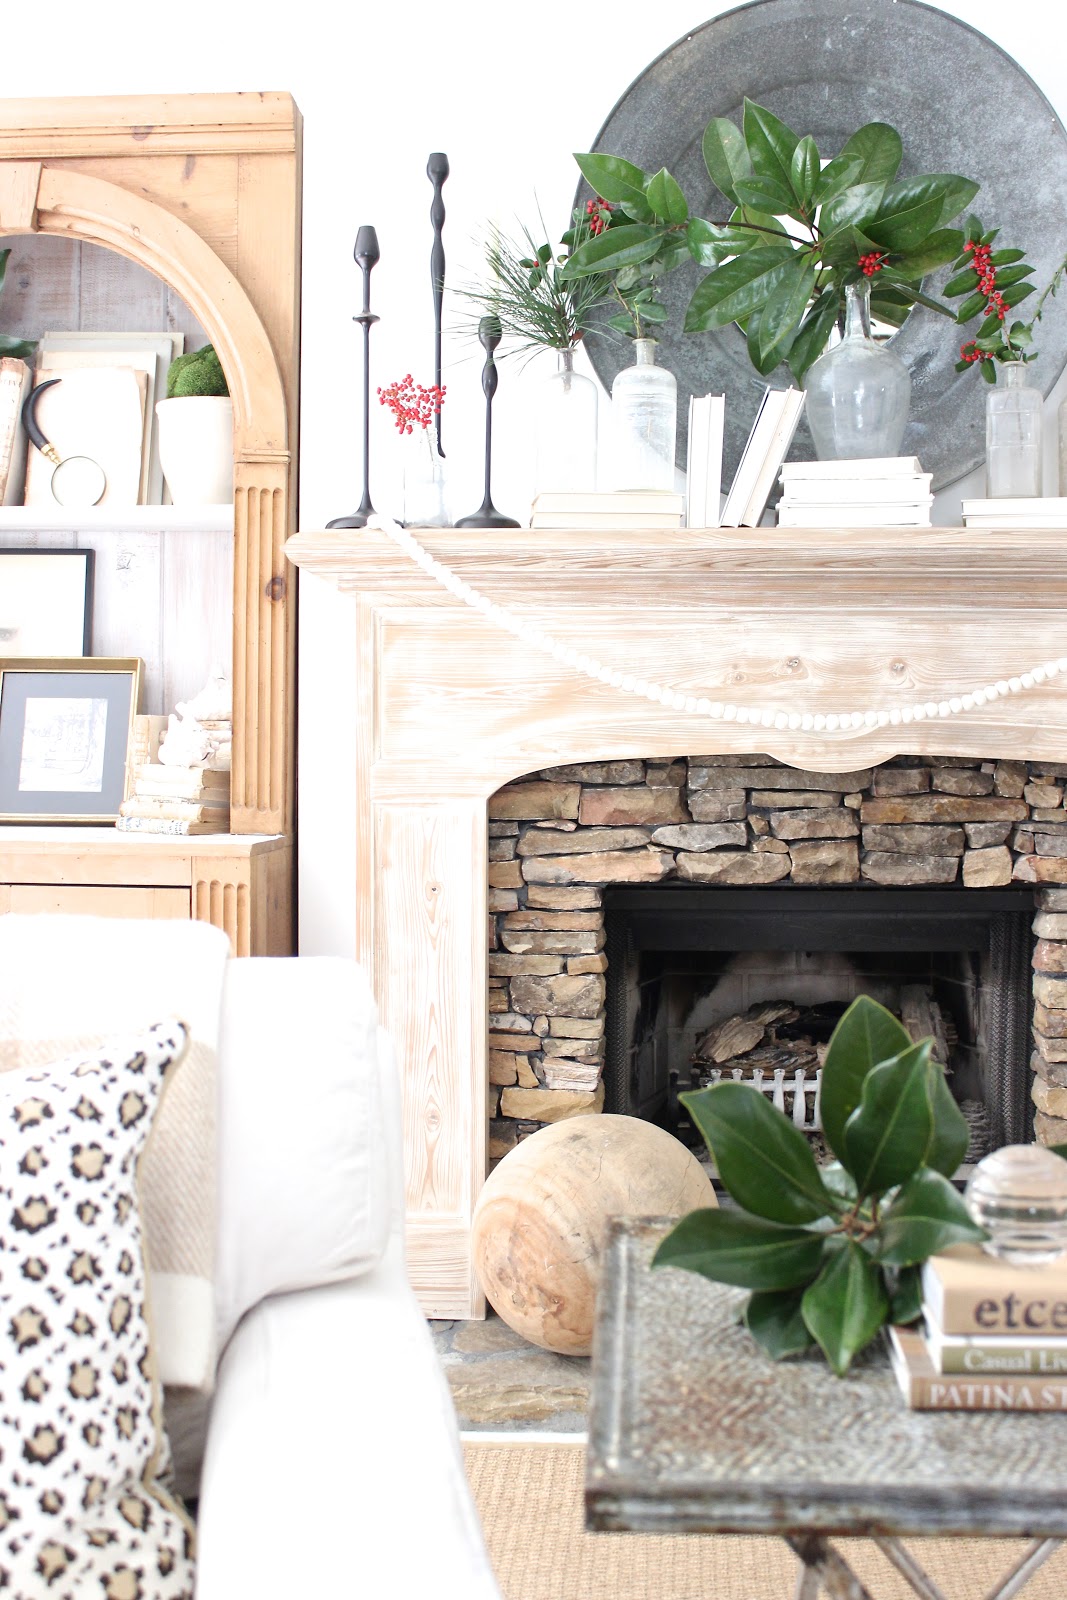 Modern rustic charm and coastal Christmas spirit in a living room by Sherry Hart.